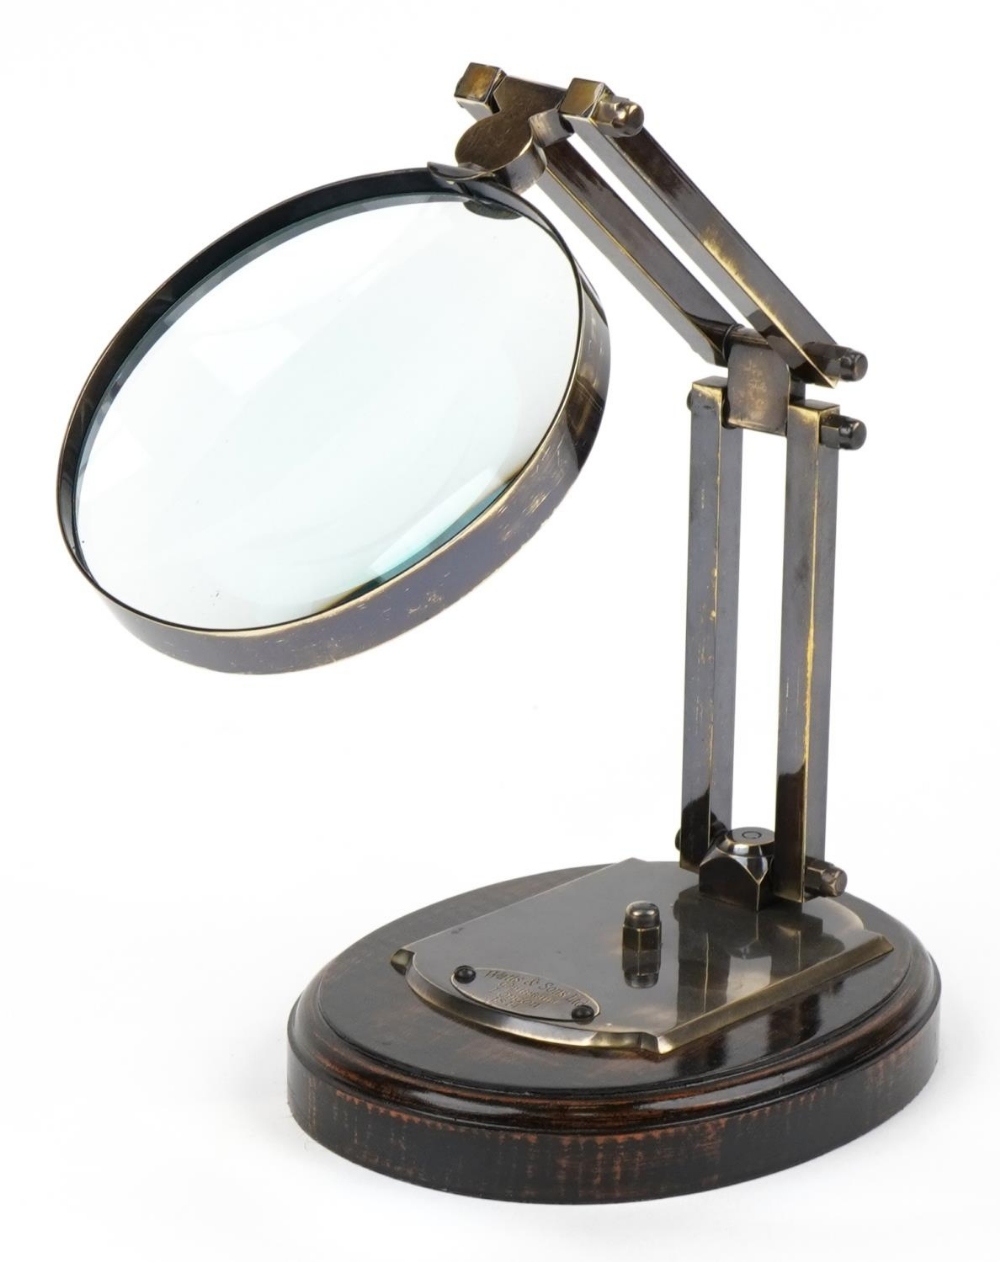 Adjustable desk top magnifying glass, 30cm high when extended : For further information on this